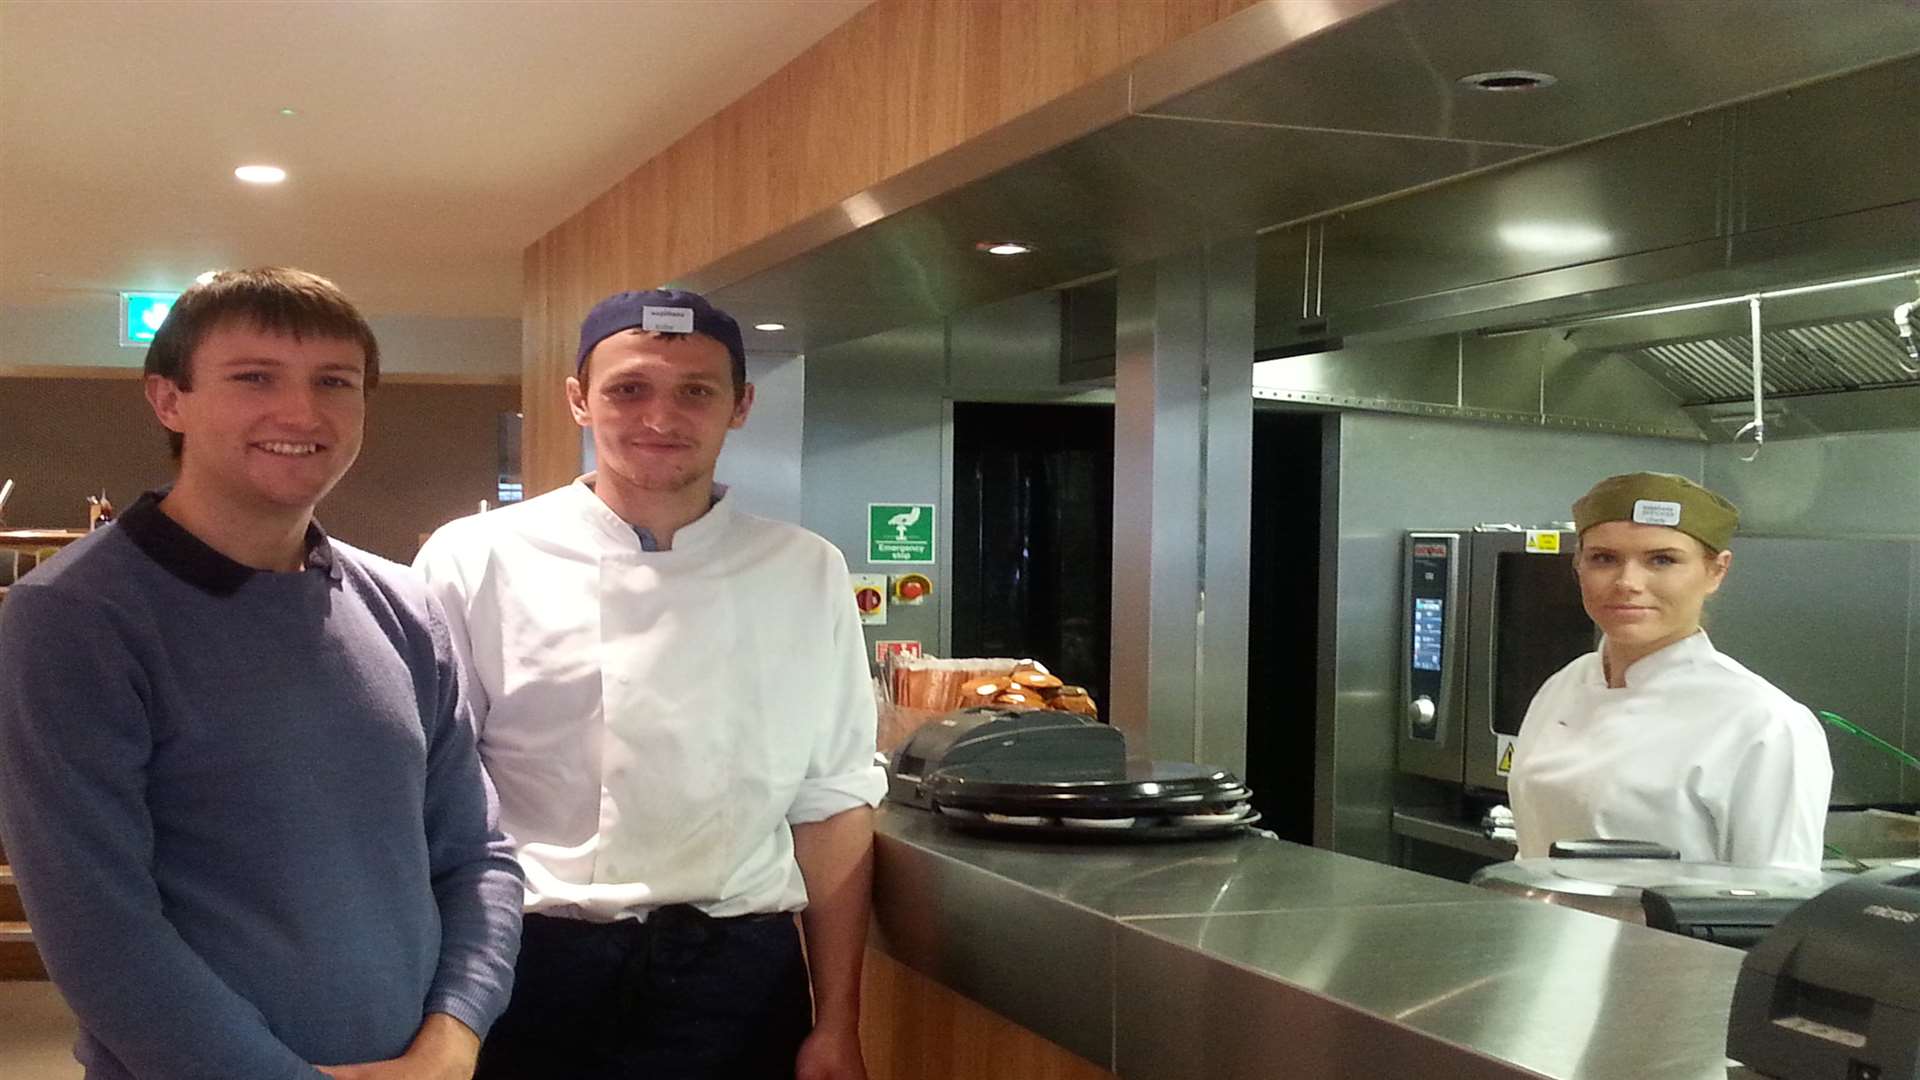 Wagamama general manager Ash Field with kitchen porter Toby Grayland and Chels Harris, kitchen team leader.